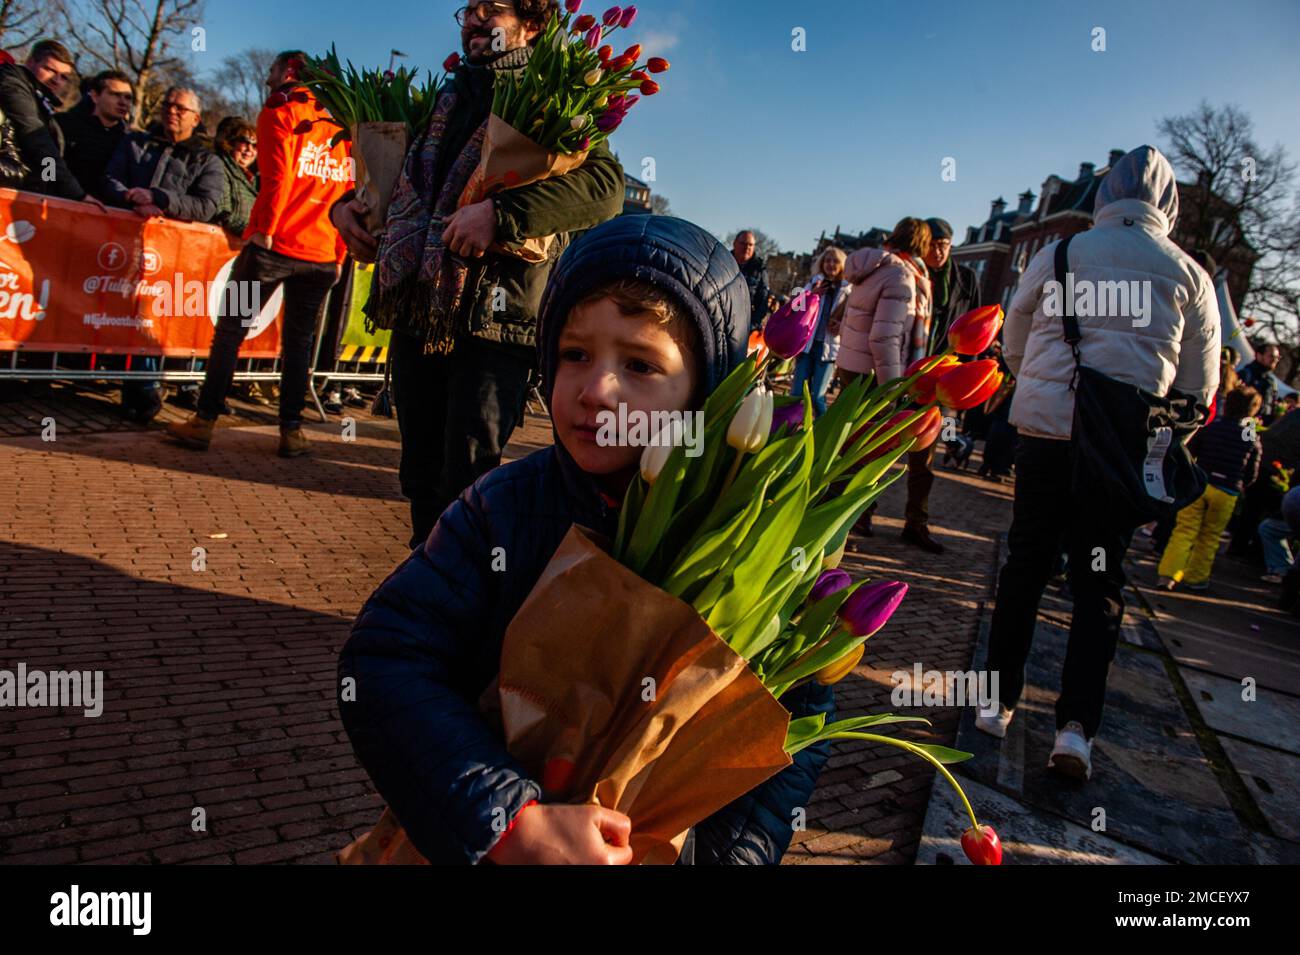 A little boy seen carrying a paper bag full of tulips. Each year on the 3rd Saturday of January, the National Tulip Day is celebrated in Amsterdam. Dutch tulip growers built a huge picking garden with more than 200,000 colorful tulips at the Museumplein in Amsterdam. Visitors are allowed to pick tulips for free. The event was opened by Olympic skating champion, Irene Schouten. Prior to the opening, she christened a new tulip: Tulipa 'Dutch Pearl' as a reference to the world - famous painting 'The girl with a pearl earring' by Johannes Vermeer. (Photo by Ana Fernandez/SOPA Images/Sipa USA) Stock Photo